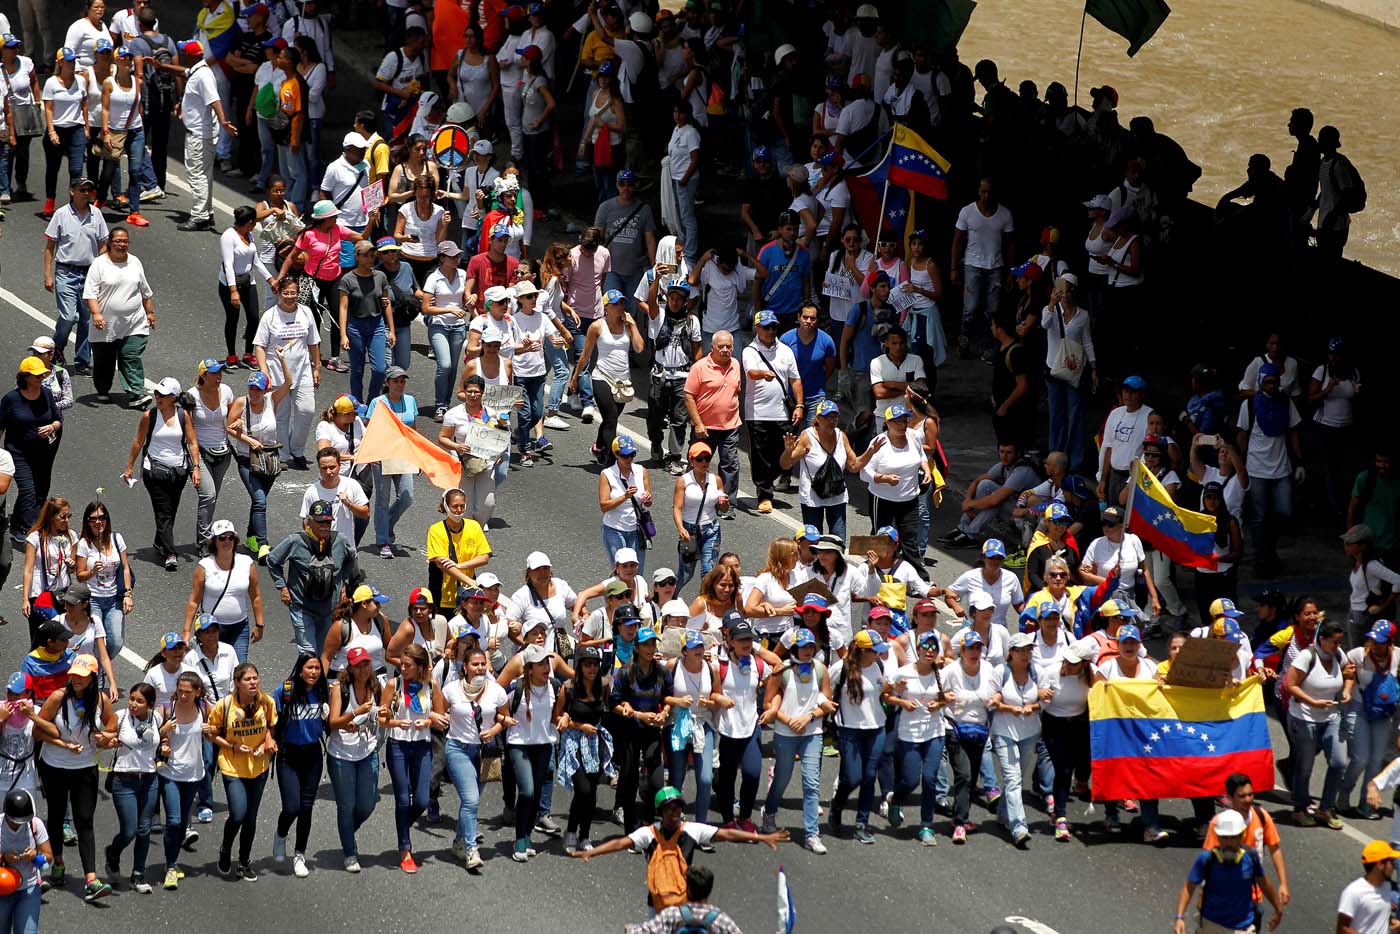 Demonstrators attend a women's march to protest against President Nicolas Maduro's government in Caracas, Venezuela May 6, 2017. REUTERS/Christian Veron